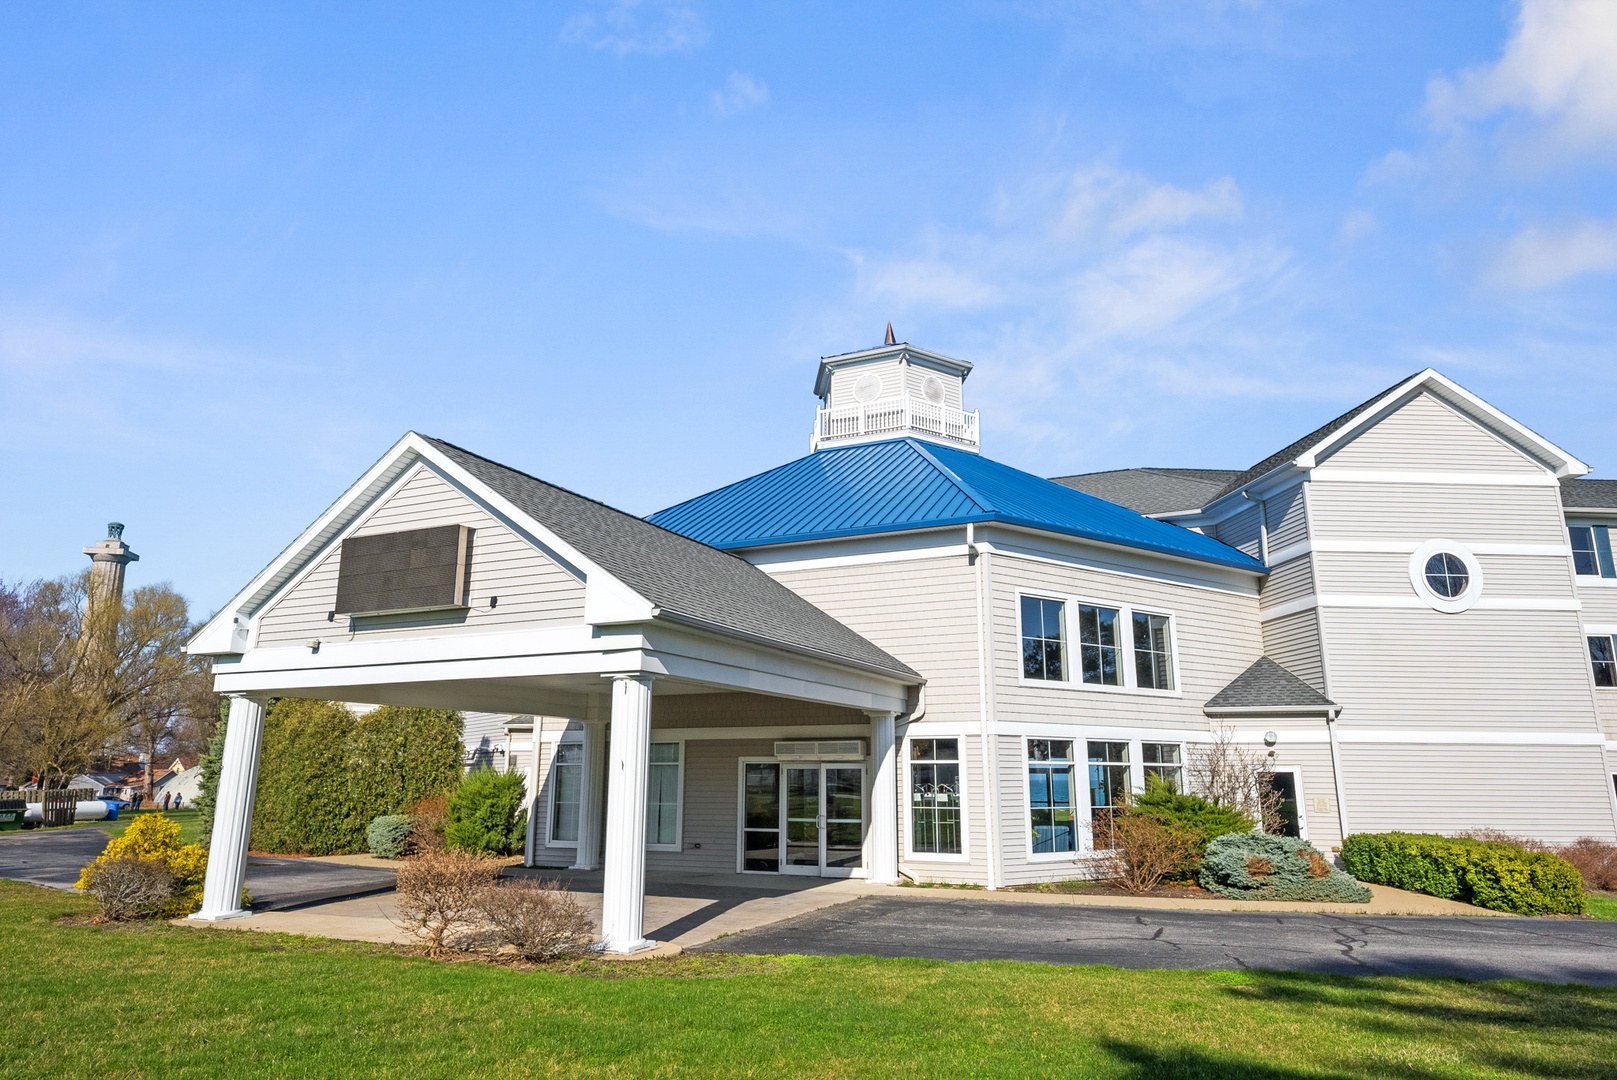 Find your perfect island oasis at Bayshore Resort on Put-in-Bay